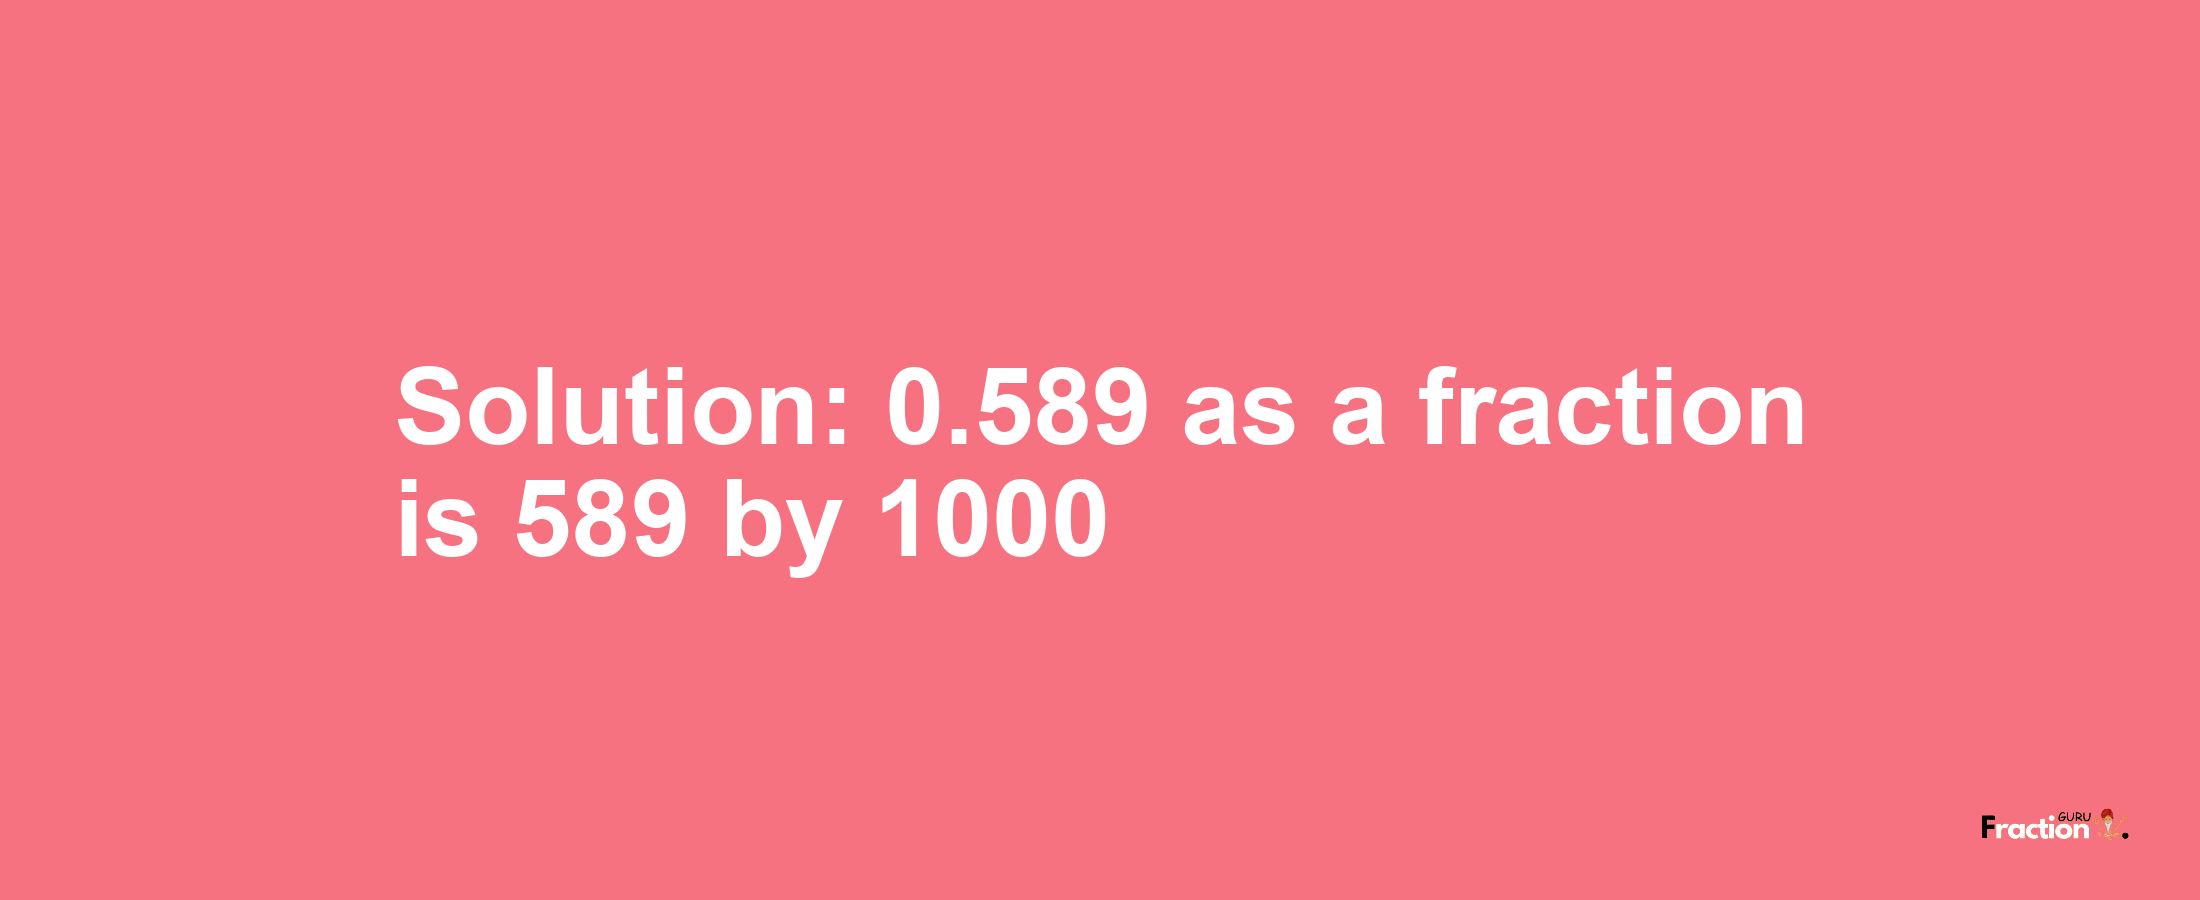 Solution:0.589 as a fraction is 589/1000